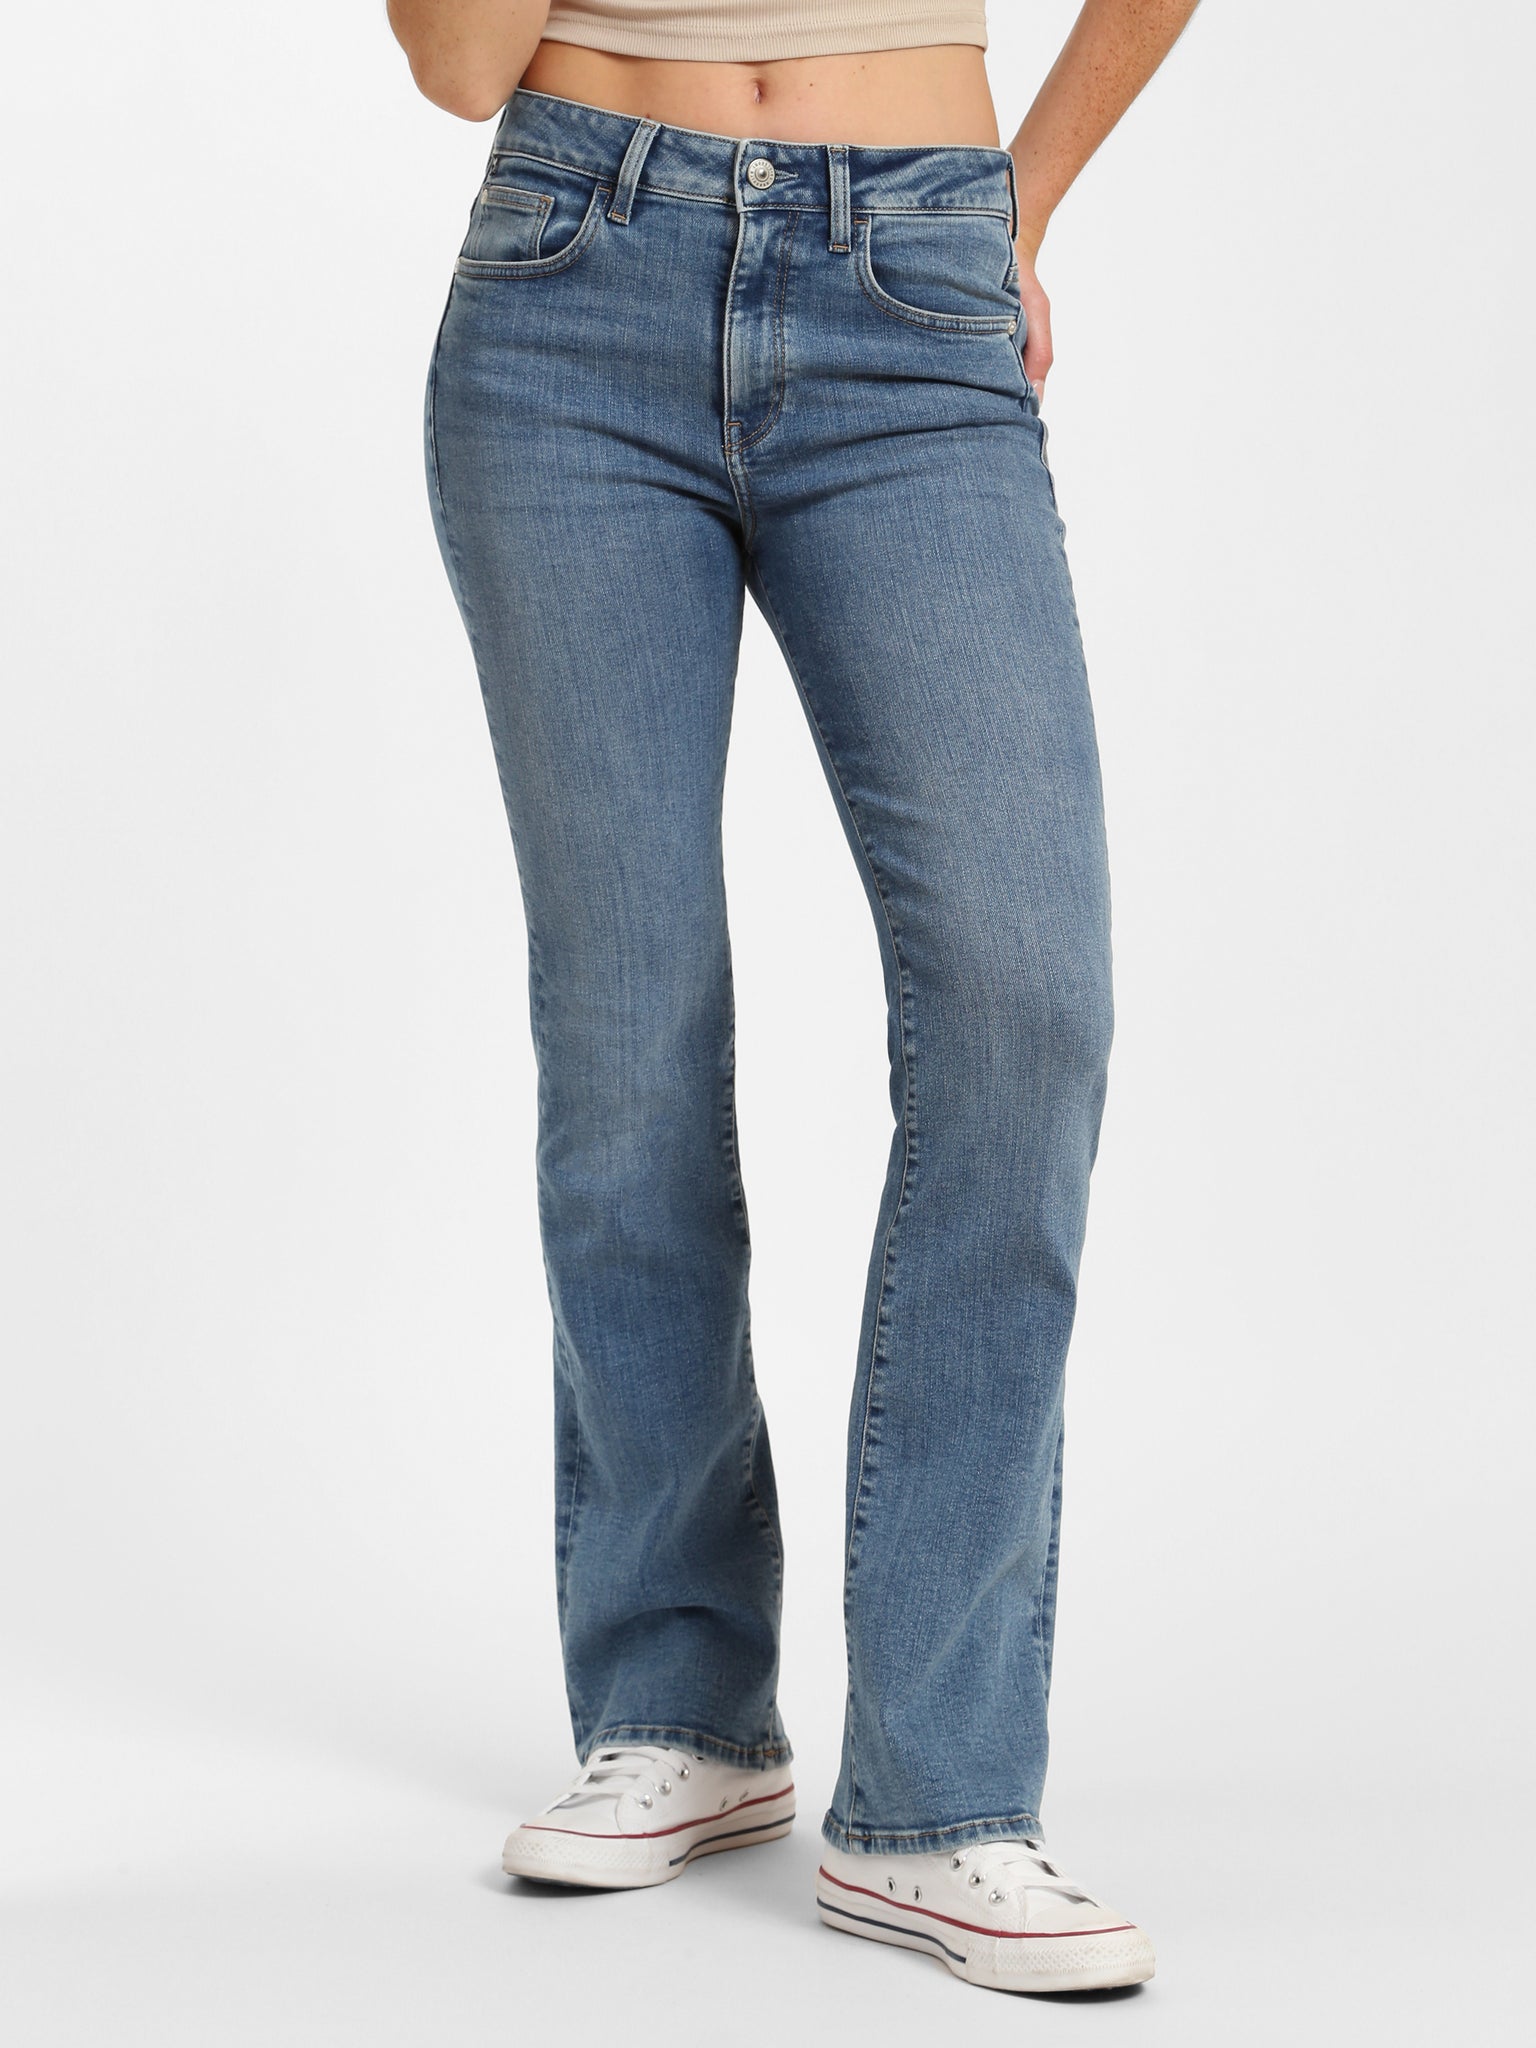 Womens' Flare, Bootcut, & Wide Leg Jeans